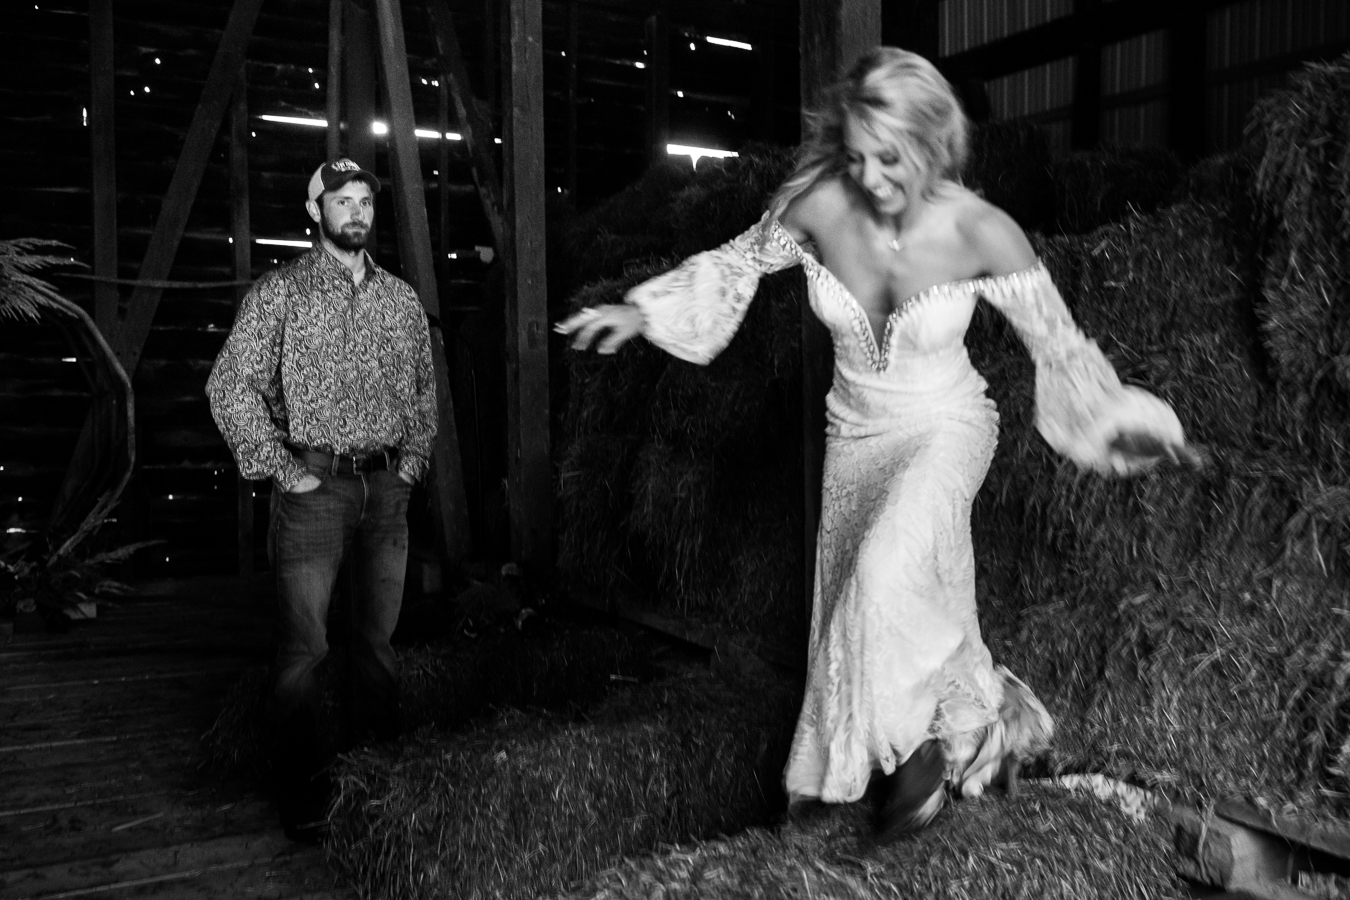 wild country wedding photographer, lisa rhinehart, captures this unique image of the bride being her outgoing, wild self and running on the hay while the groom chills in the back watching his bride